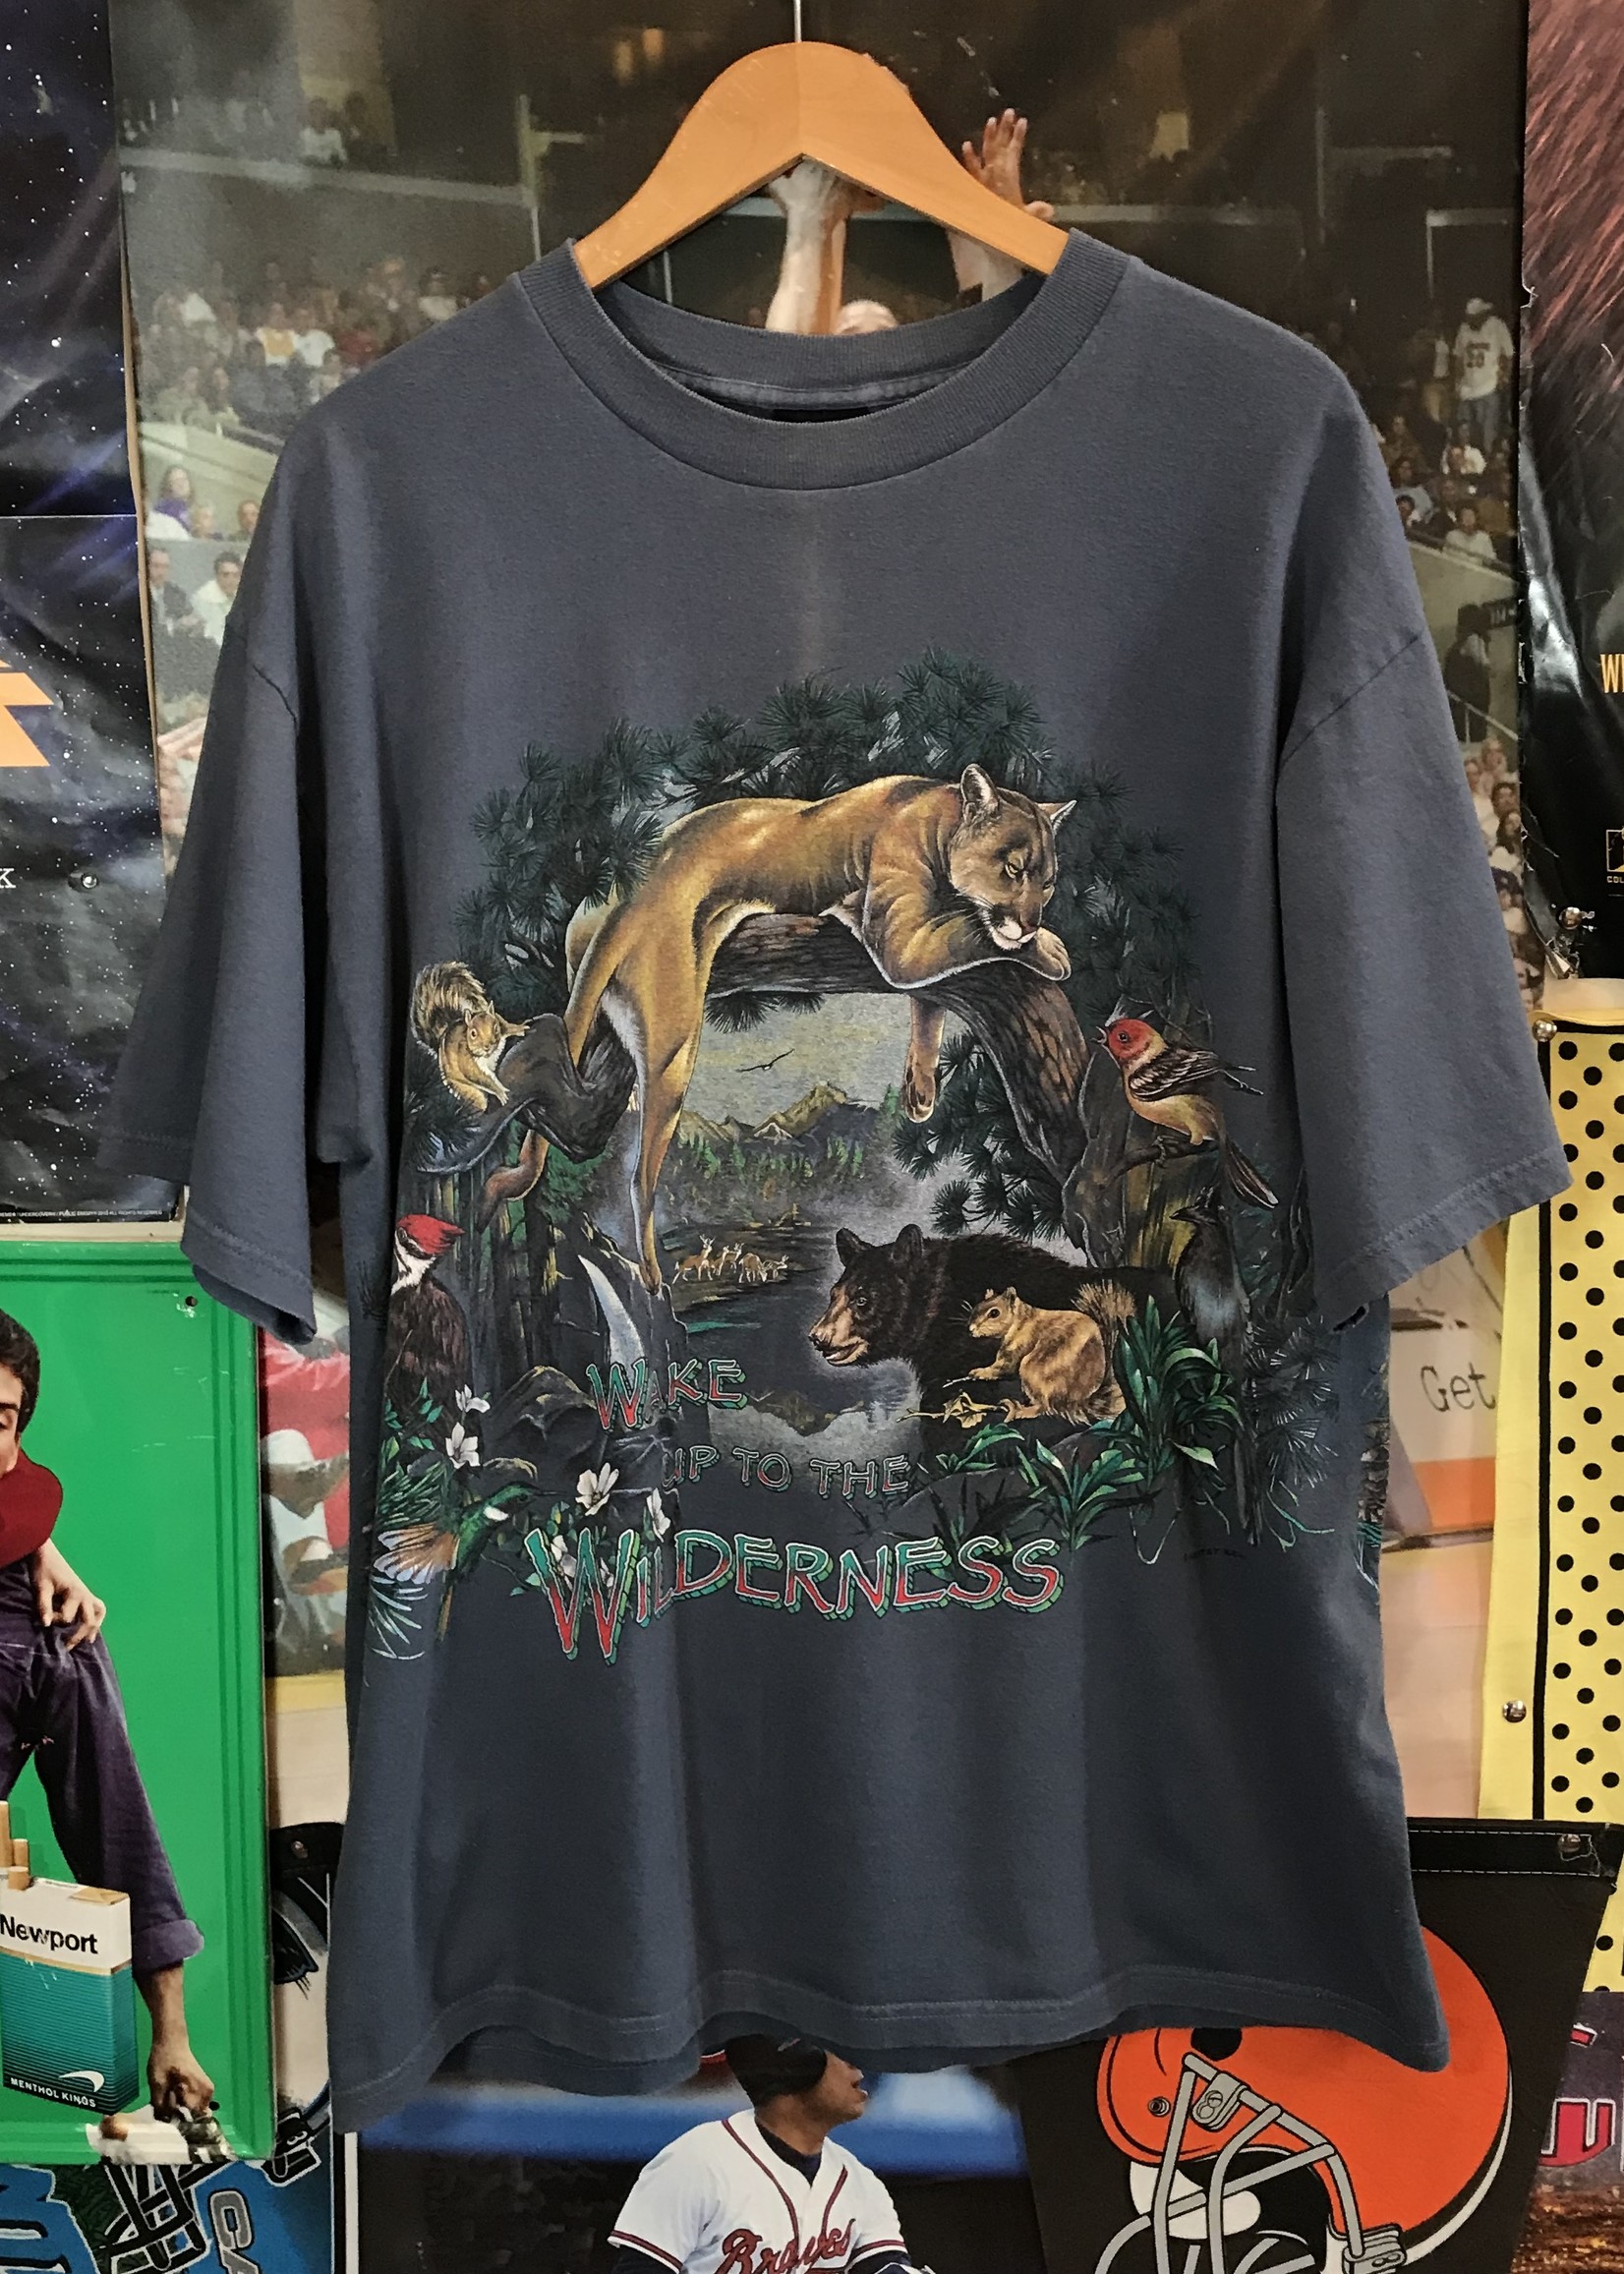 9562	wake up to the wilderness tee sz. XL